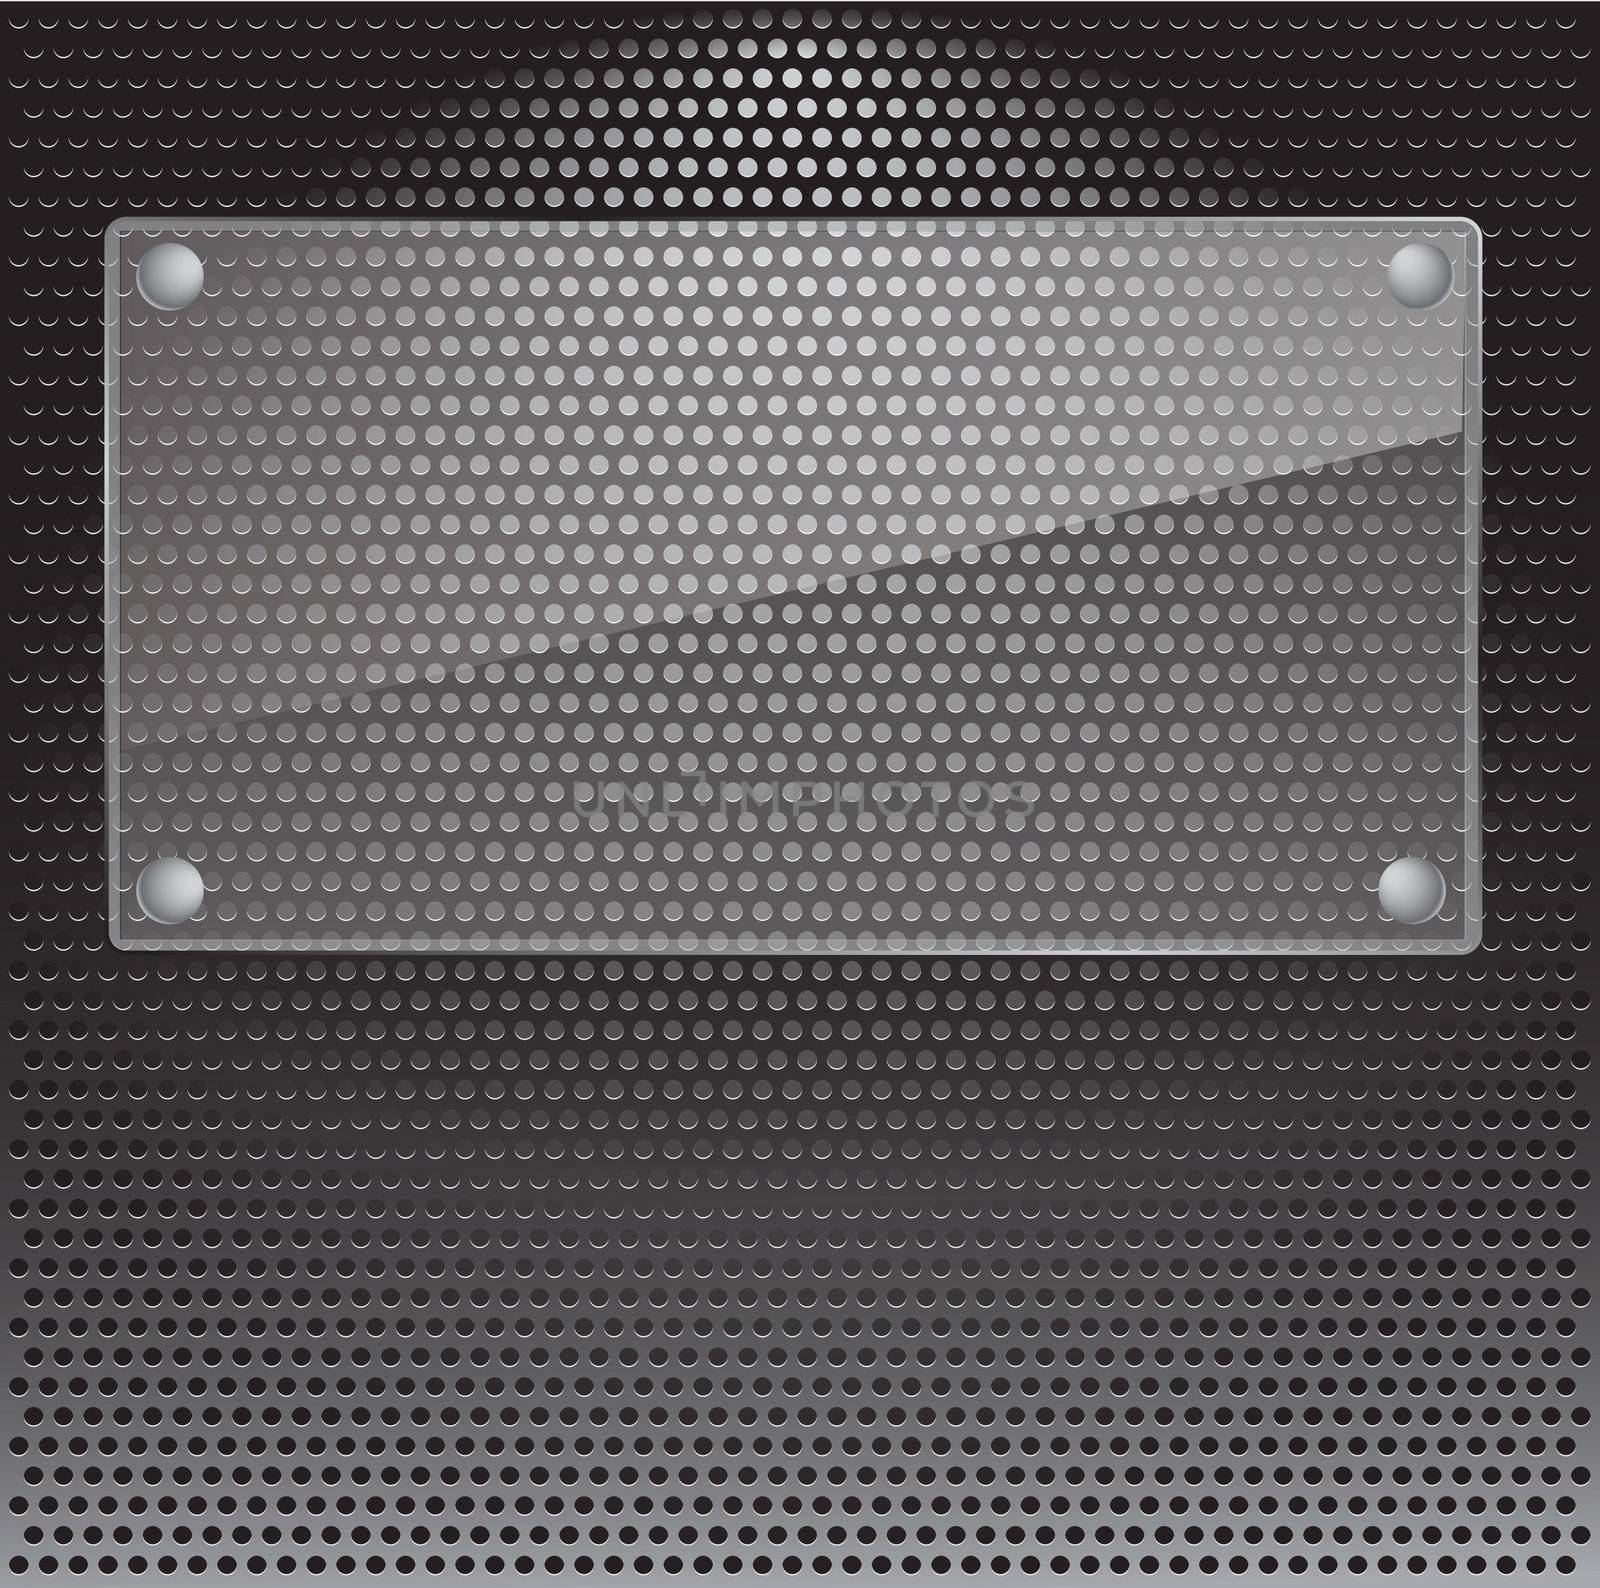 Realistic vector speaker grill background with glass